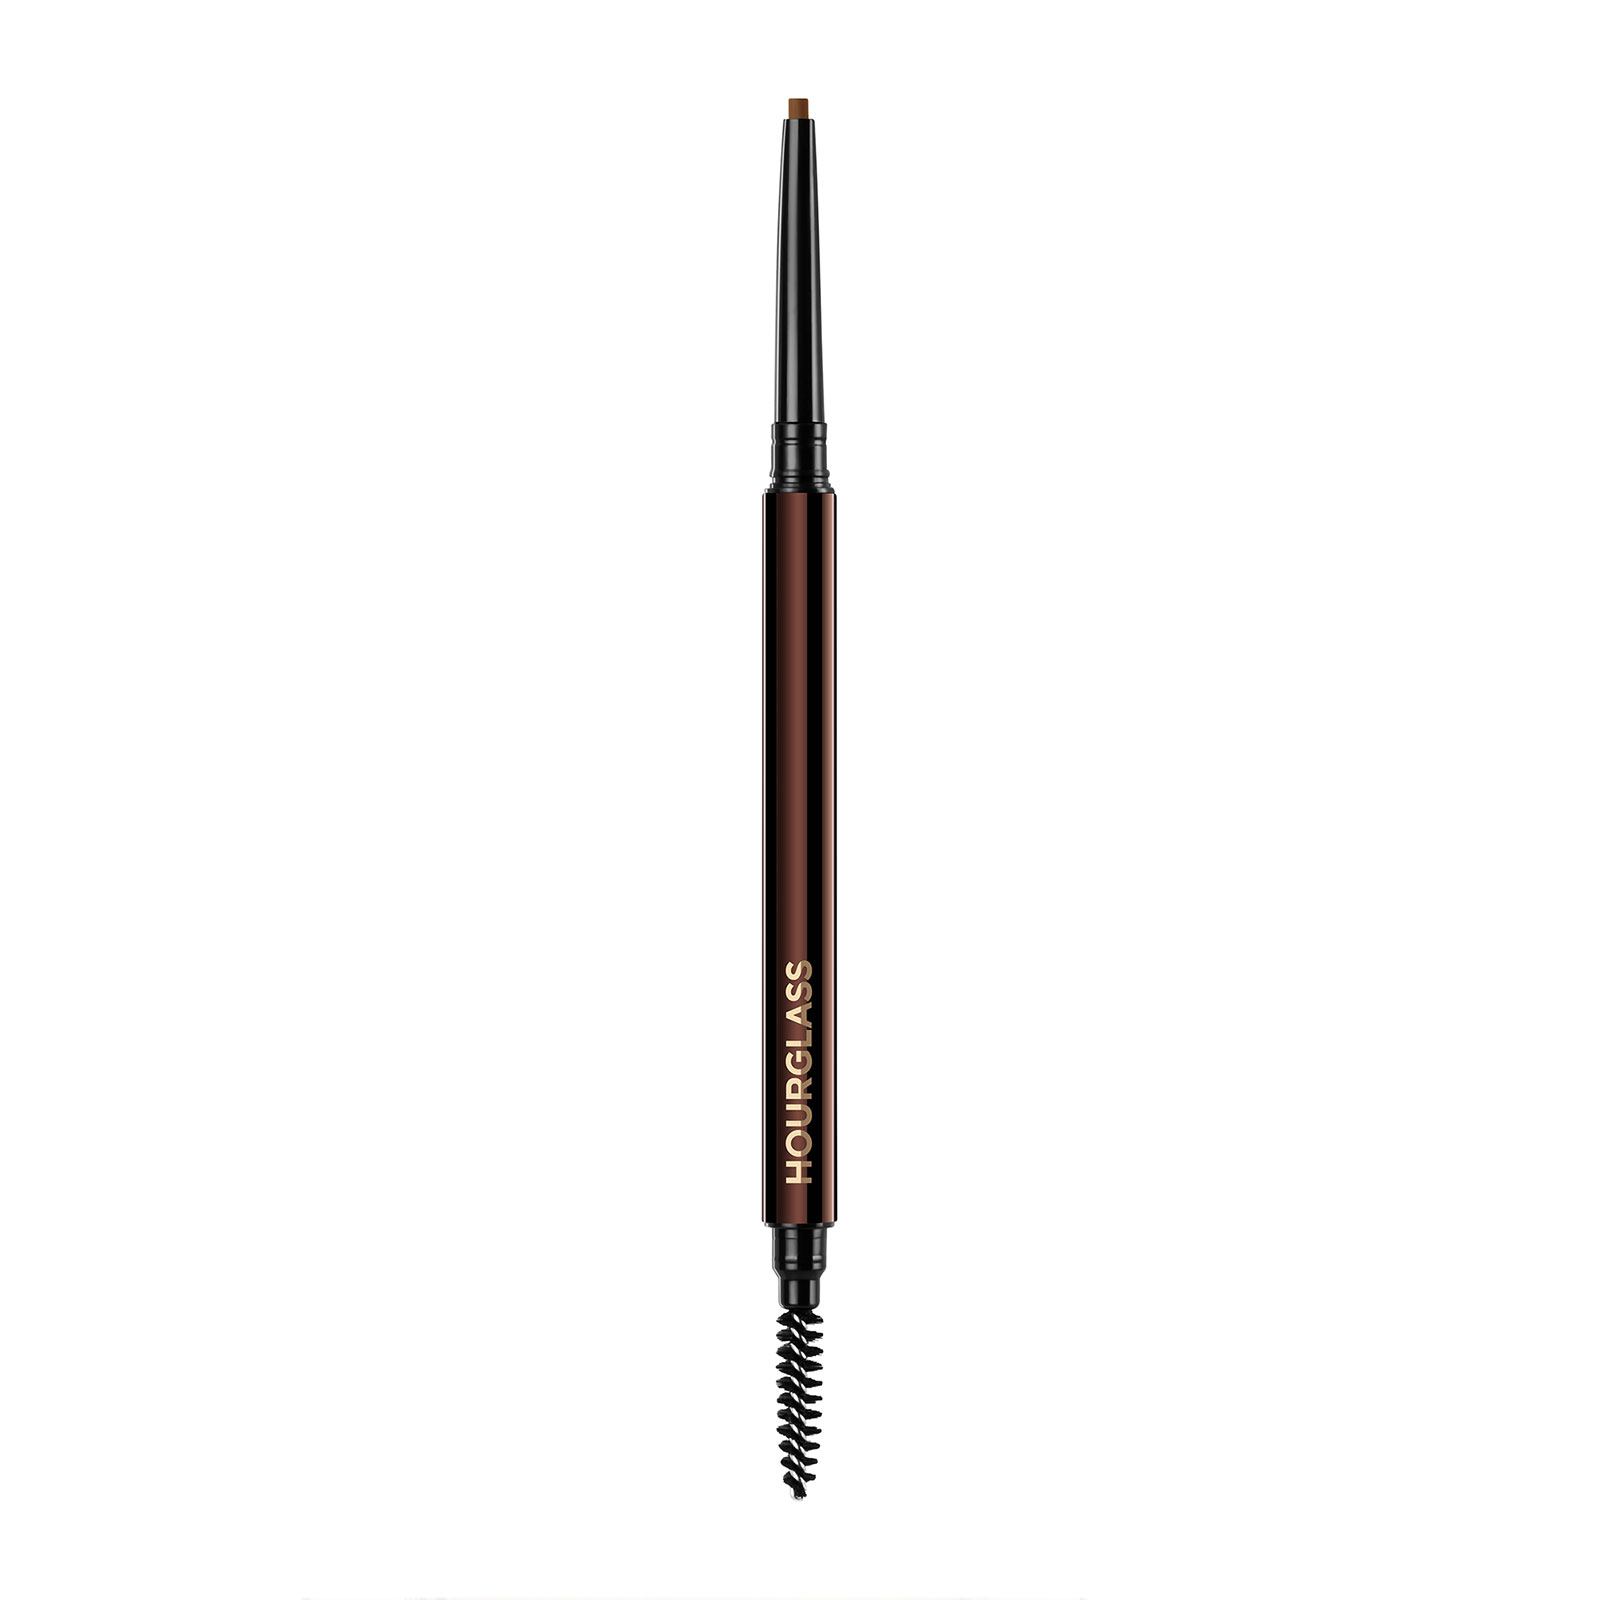 Hourglass Arch Brow Micro Sculpting Pencil 0.4G Warm Blonde